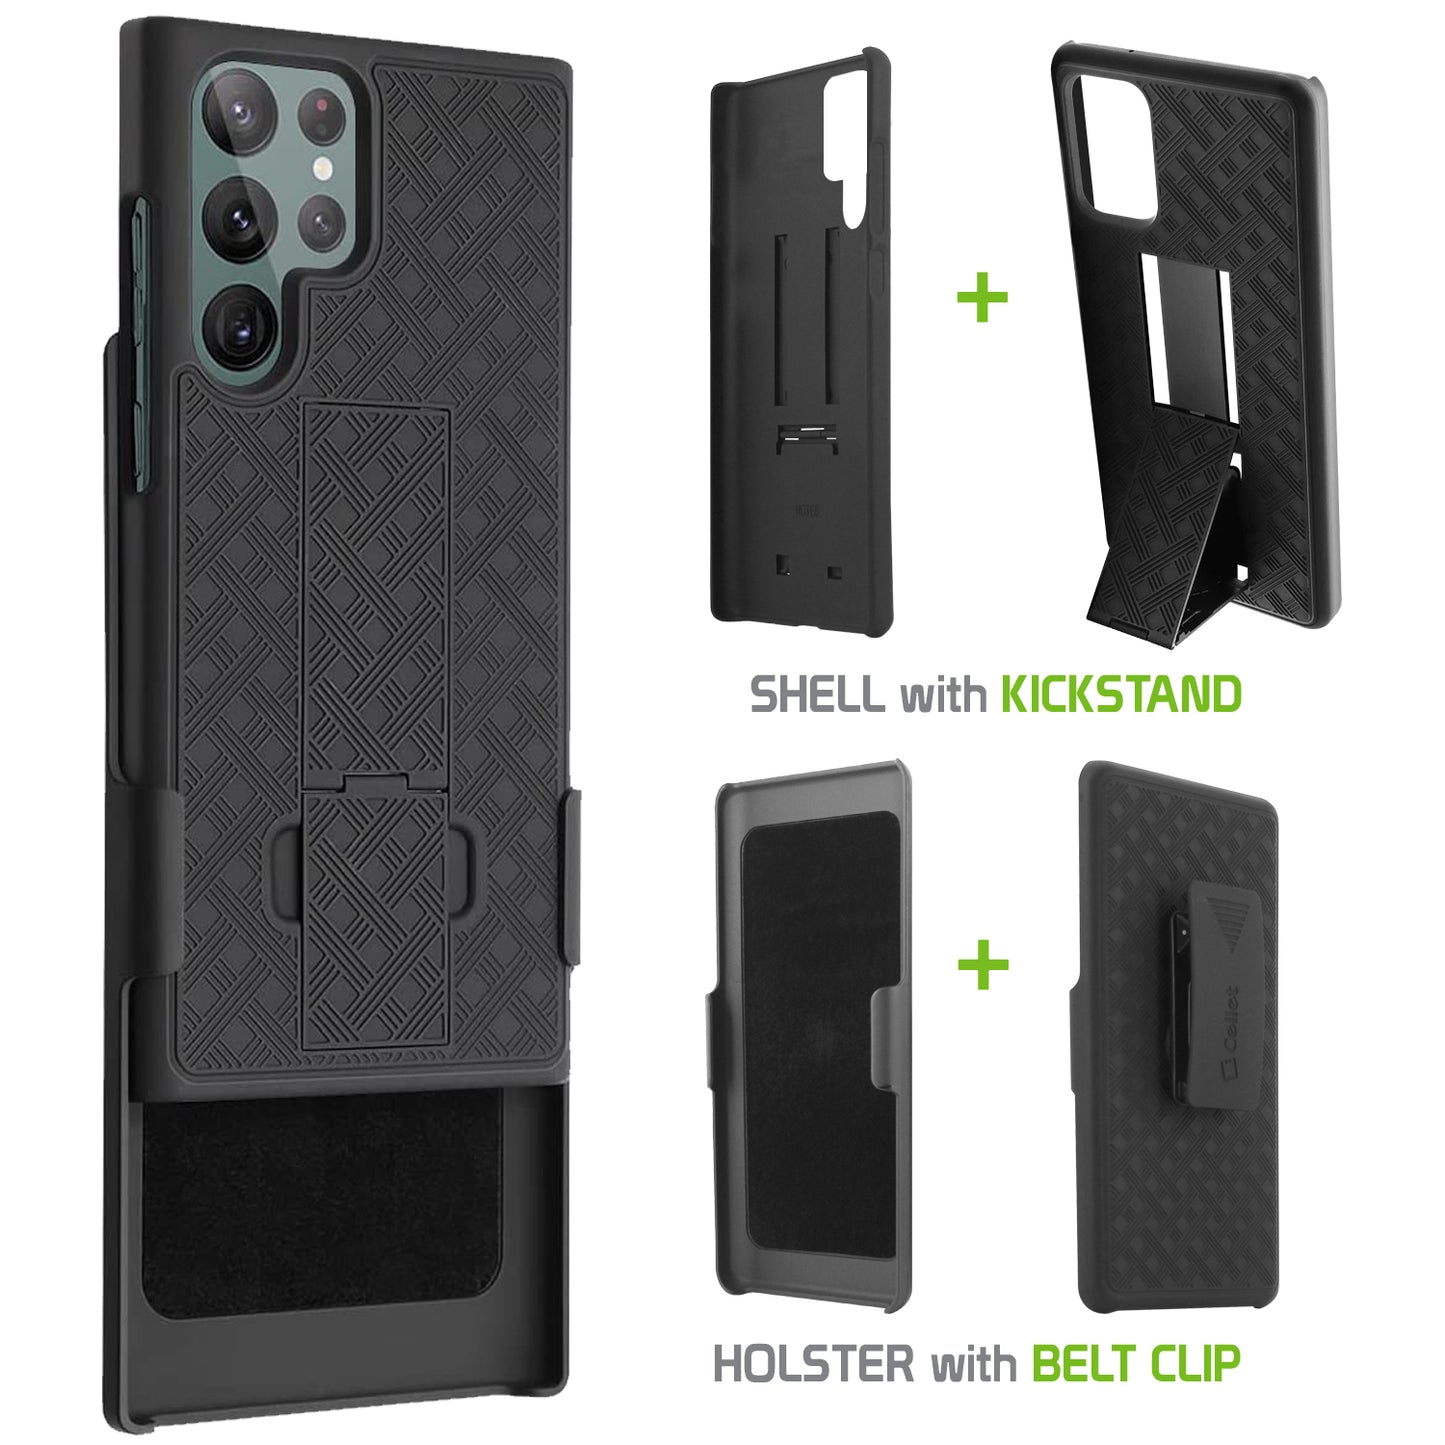 HLSAMS22U - Cellet Galaxy S22 Ultra Holster Case, Heavy Duty Holster Phone Case with Built-in Kick-Stand and Spring Belt Clip